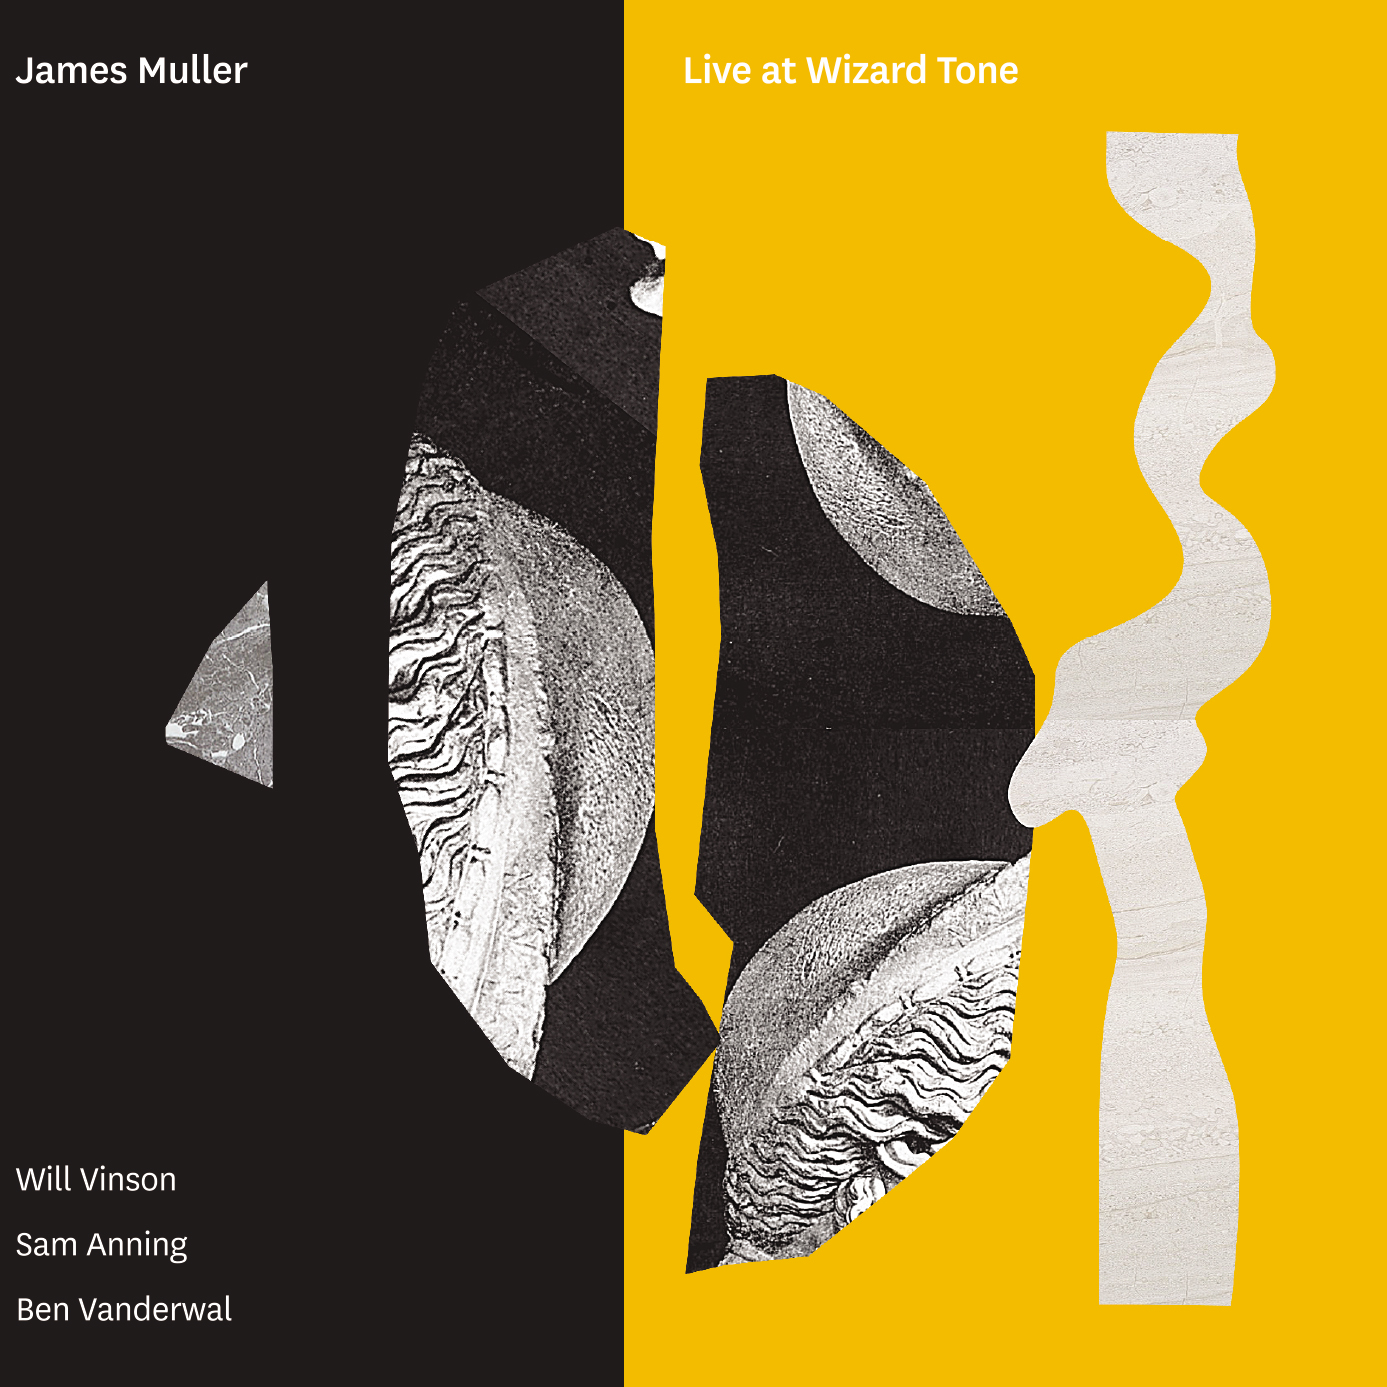 James Muller - "Live at Wizard Tone" [Recorded, Mixed and Mastered (JP)]